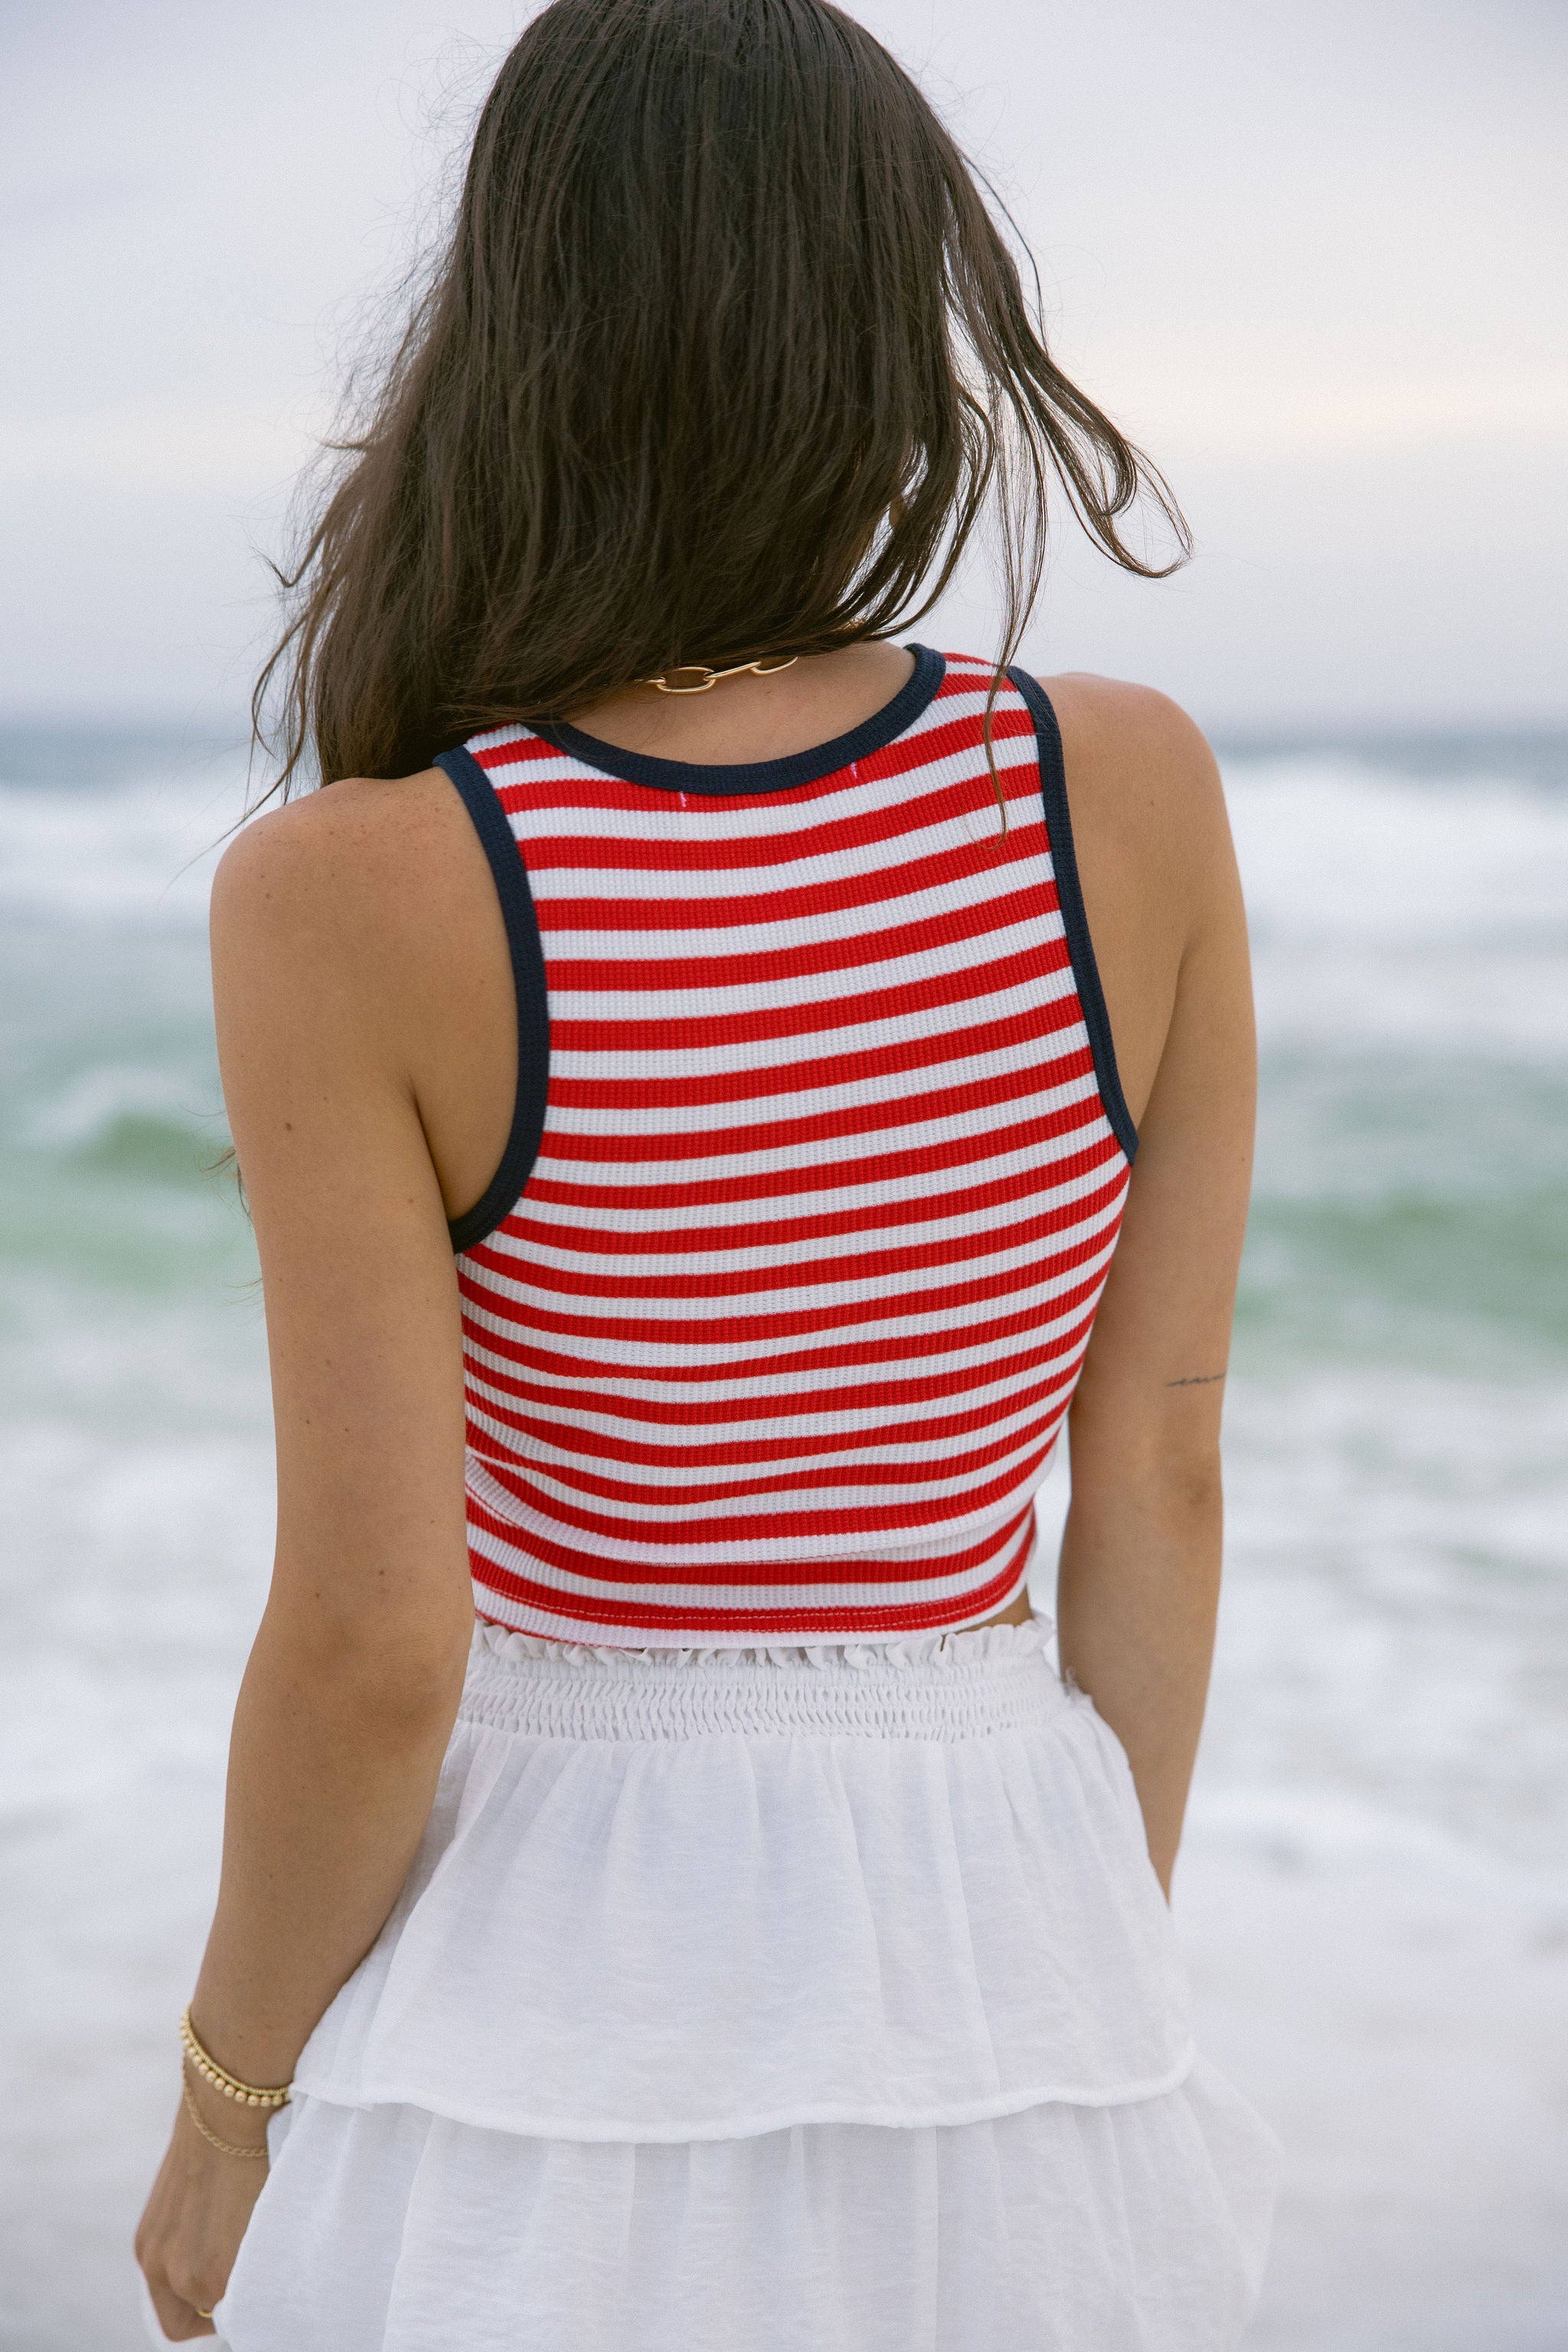 Upper body back view of female model wearing the Felicity Red, White, & Blue Striped Tank Top that has red and white horizontal stripes, navy trim, a cropped waist, and thick straps. Worn with white skirt.